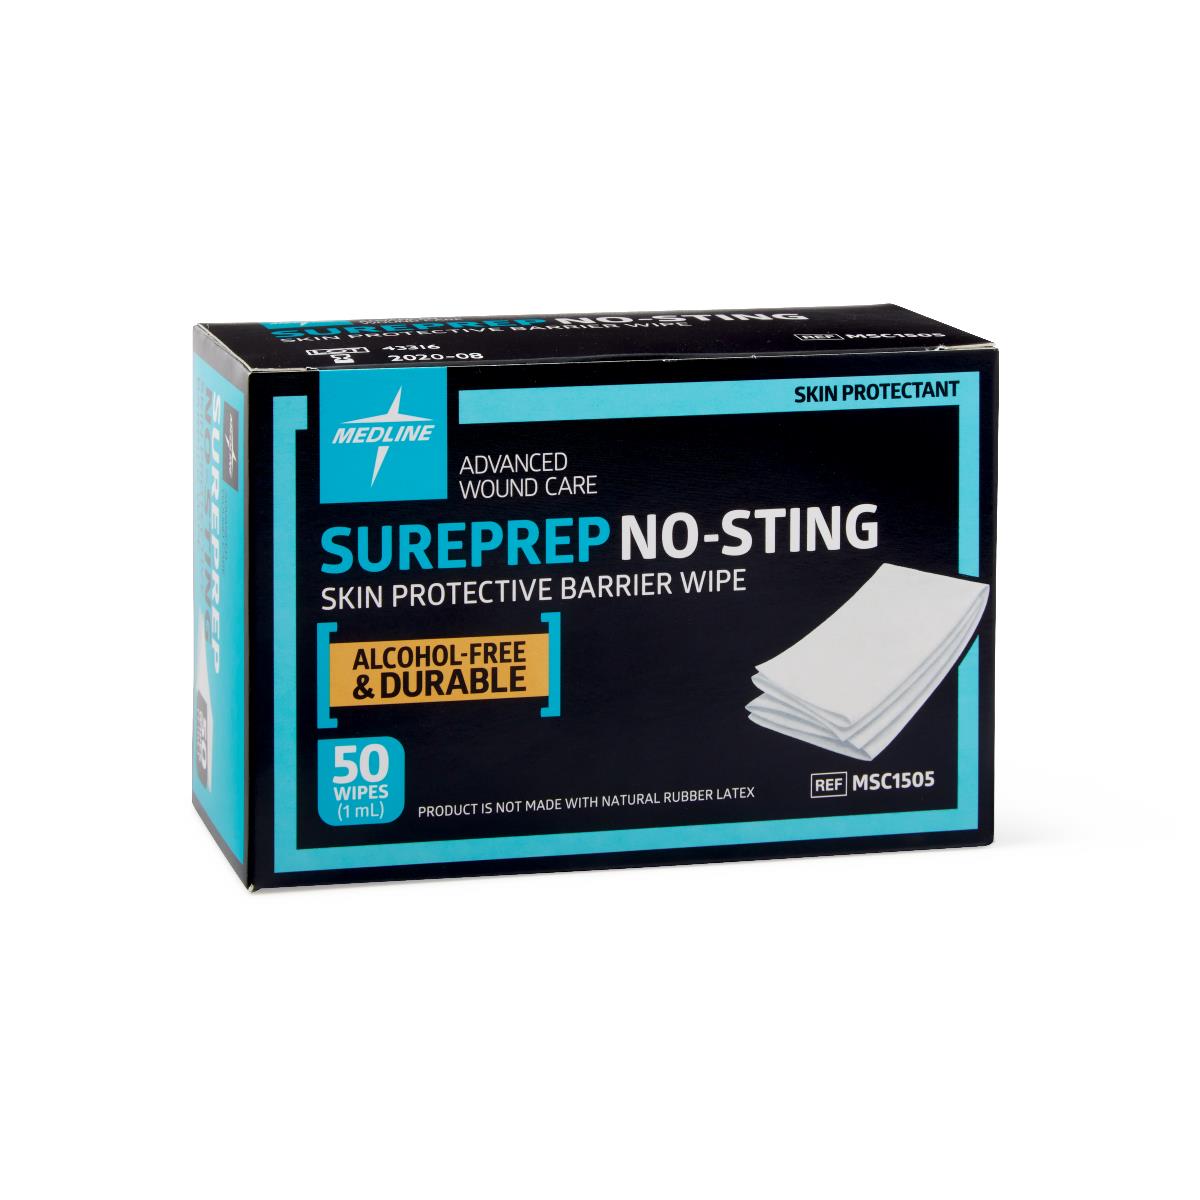 Sureprep No-Sting Protective Barrier Wipes